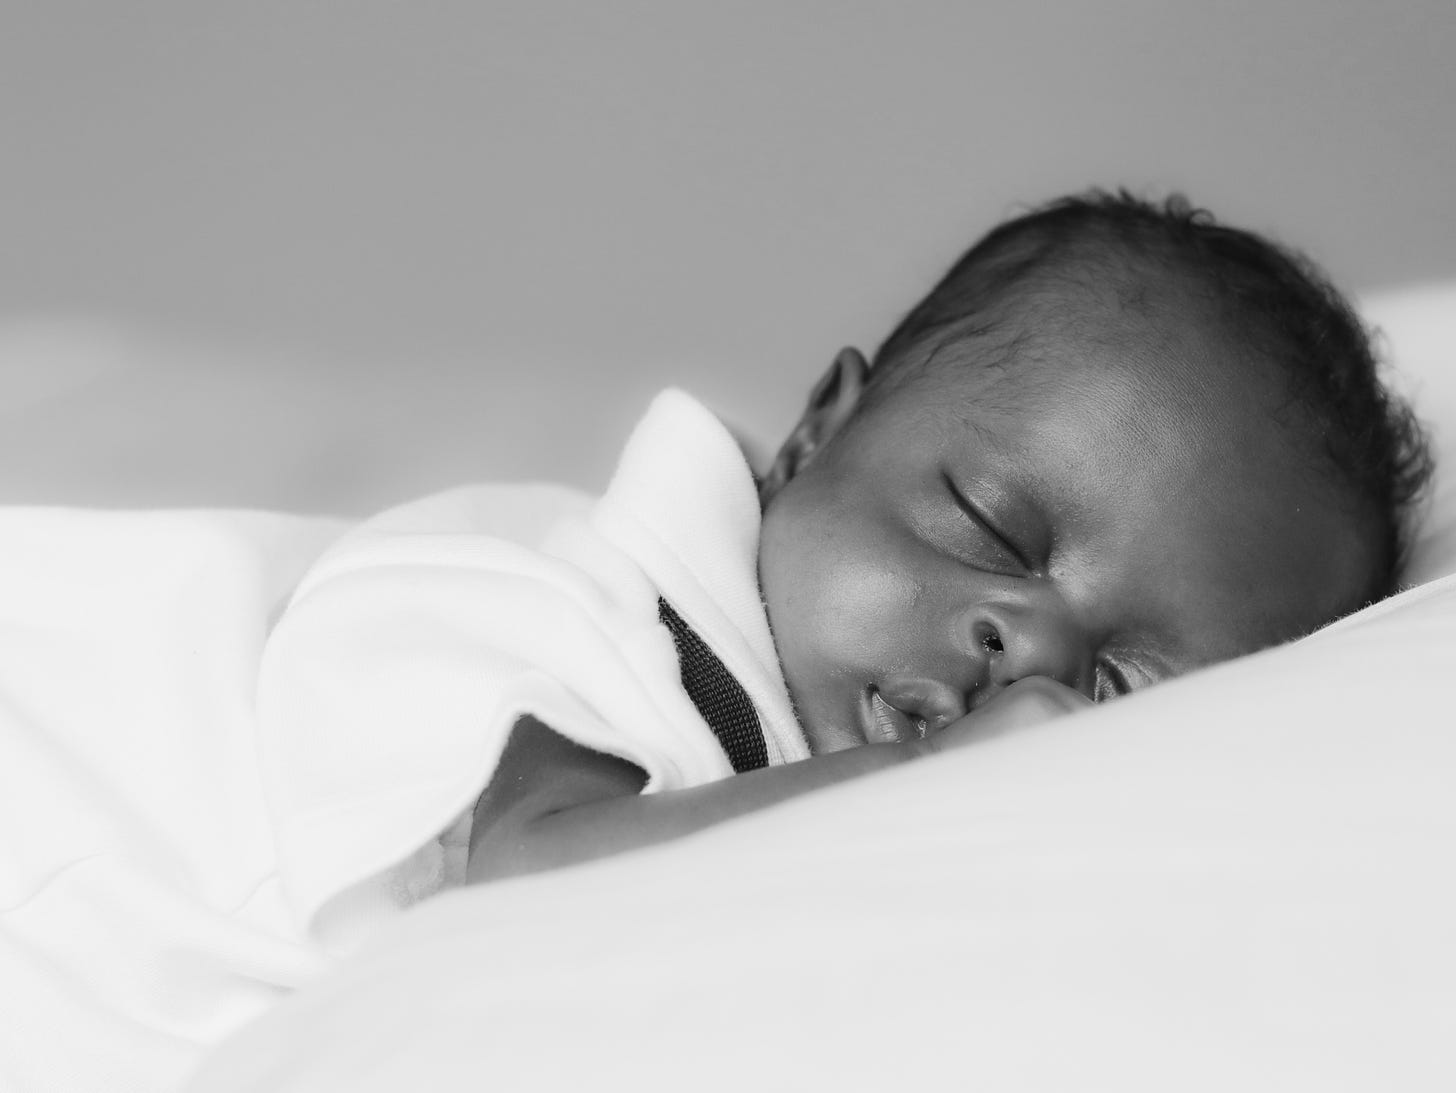 Infant sleeping on stomach on a white sheet and mattress